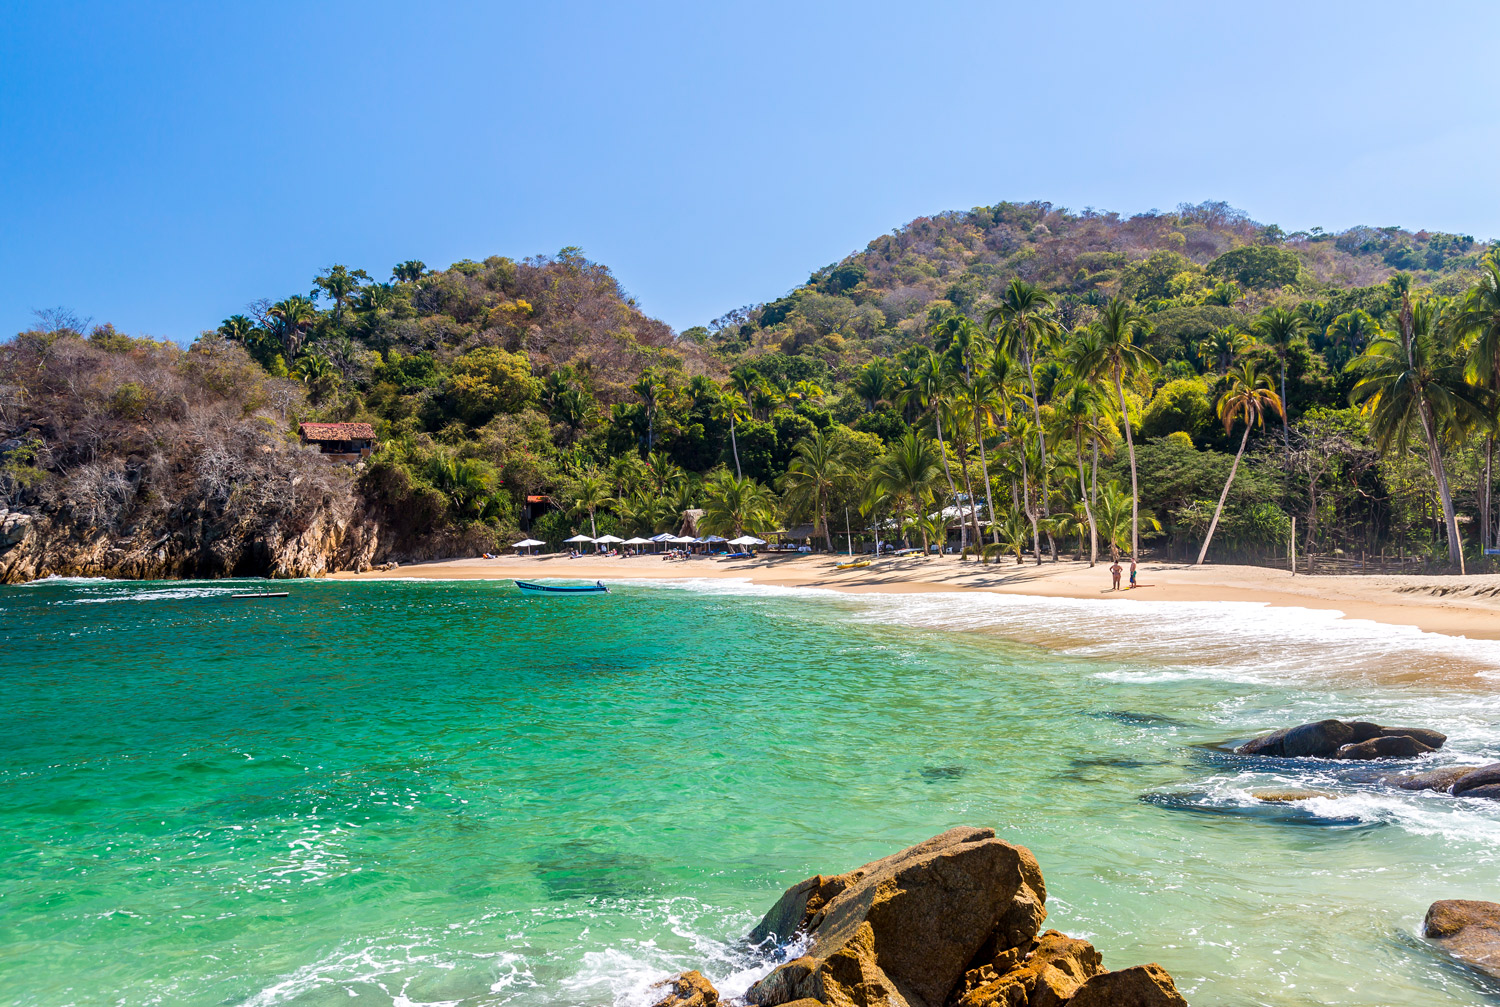 TOP 5: The best resorts and beaches in Puerto Vallarta